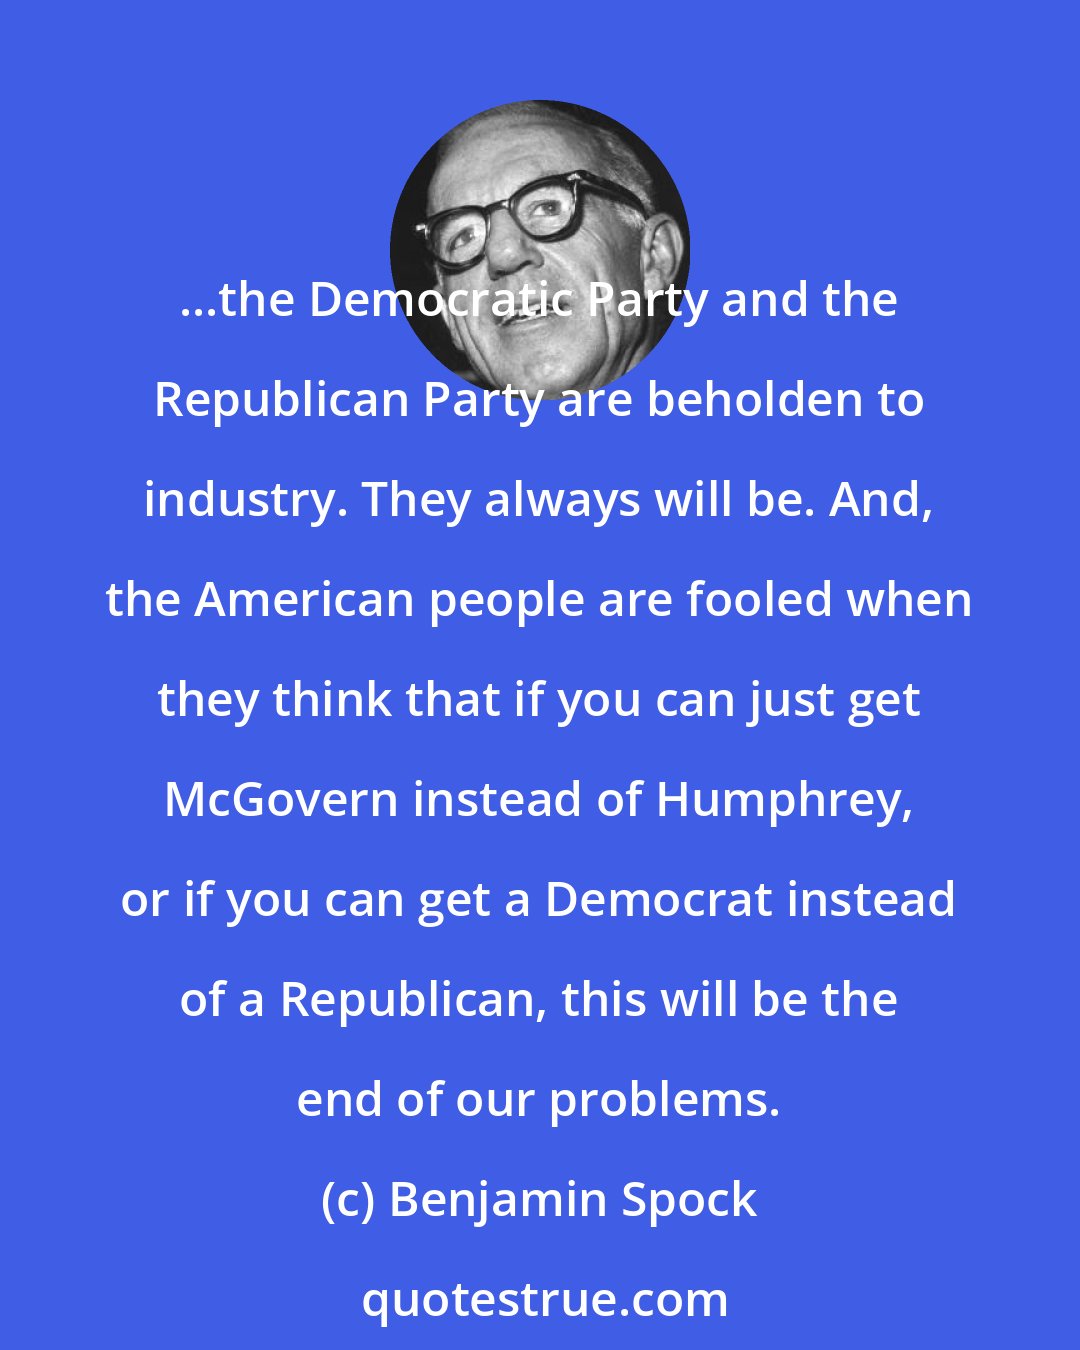 Benjamin Spock: ...the Democratic Party and the Republican Party are beholden to industry. They always will be. And, the American people are fooled when they think that if you can just get McGovern instead of Humphrey, or if you can get a Democrat instead of a Republican, this will be the end of our problems.